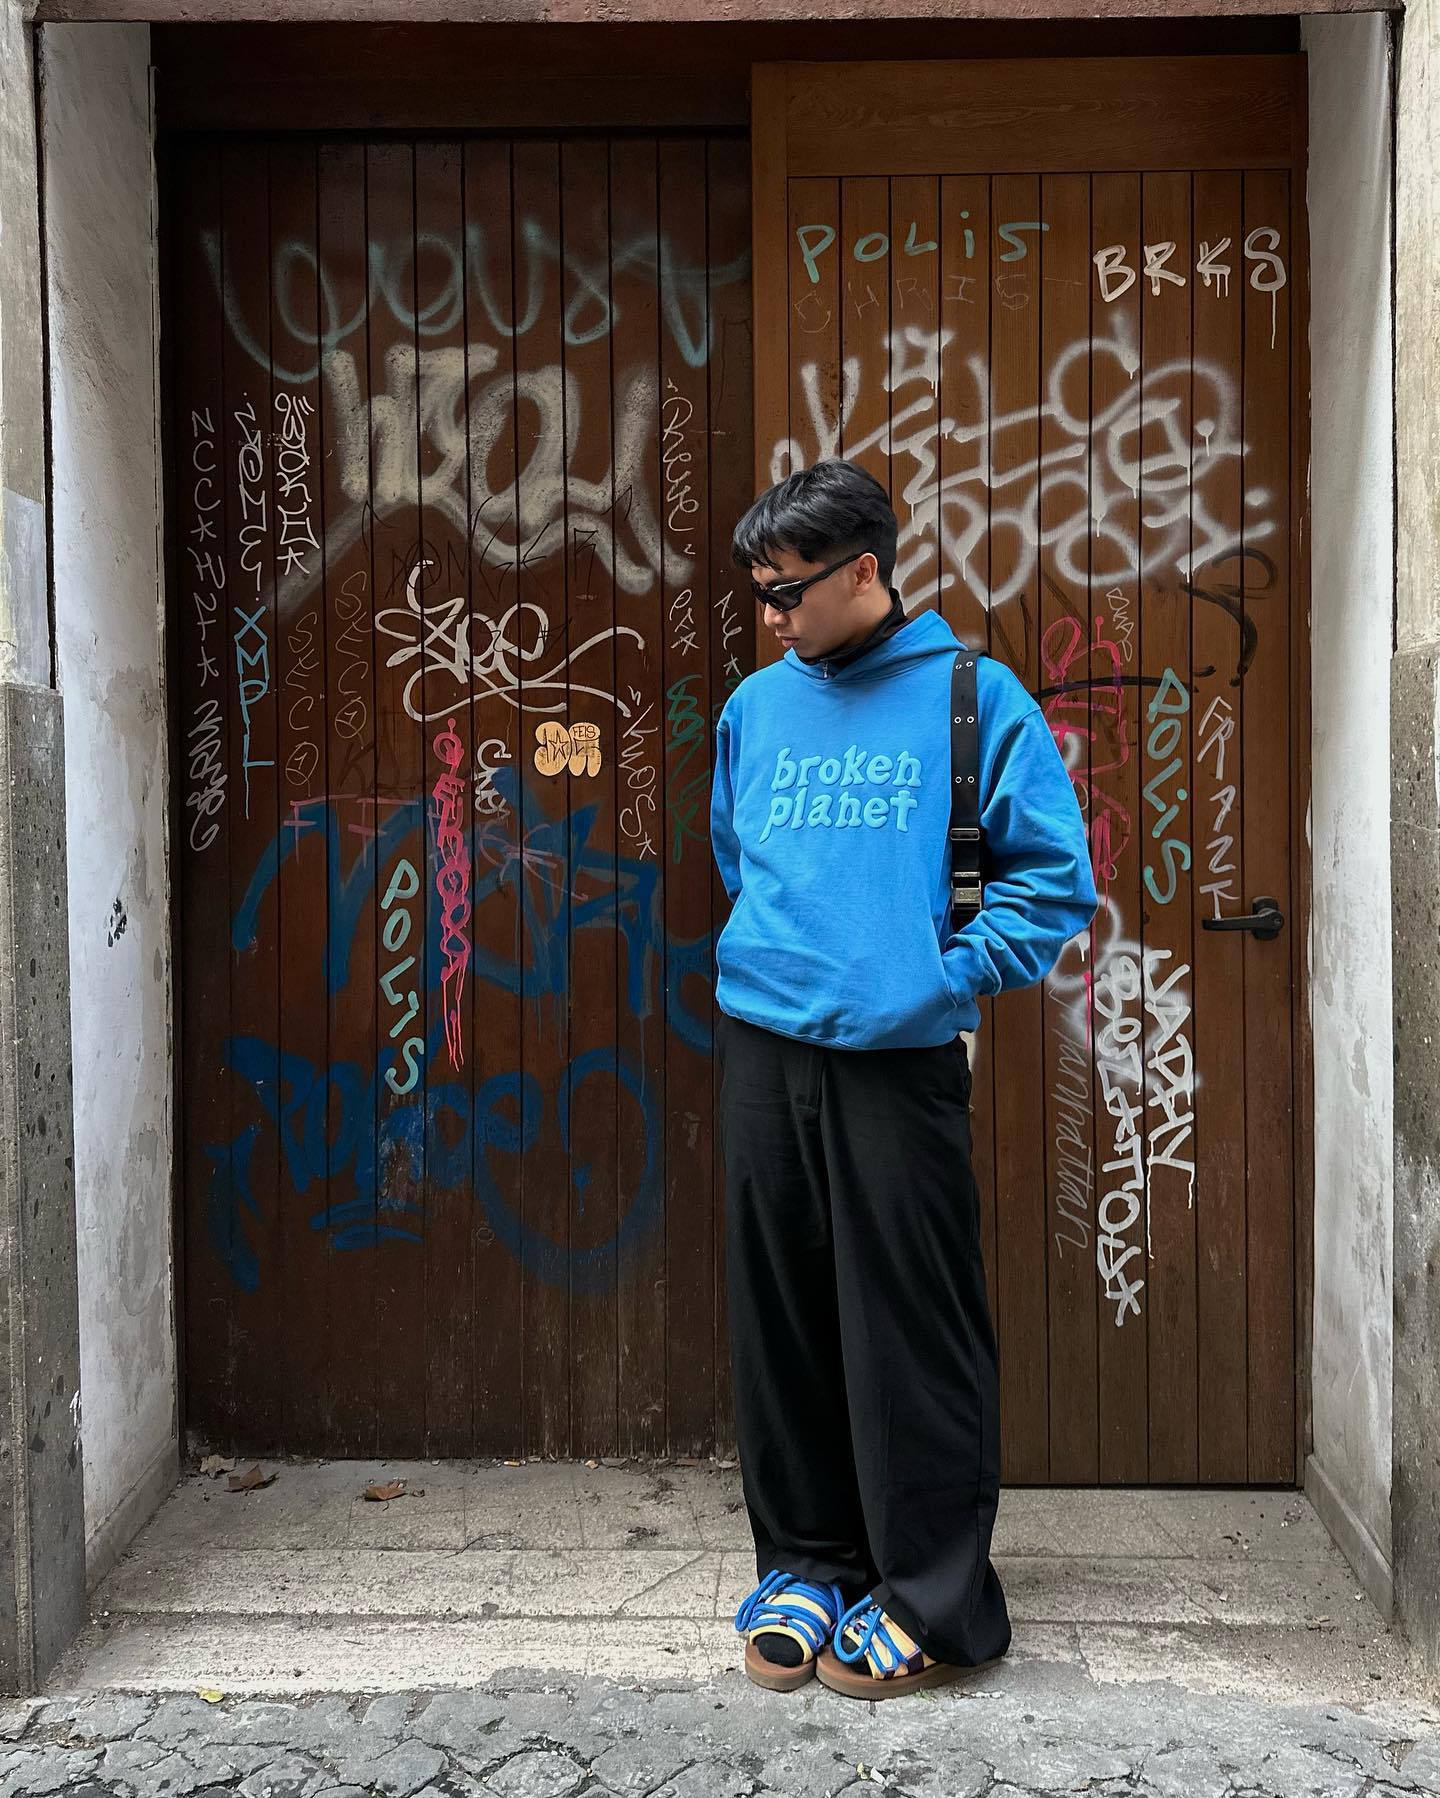 Person wearing a blue "broken planet" sweatshirt, black pants, and blue sandals, standing in front of a wooden door covered in graffiti. The street hipster effortlessly blends comfort and style, with their Maramalive™ Letter Foam Printed Hoodie Punk Rock Casual Sweater adding an extra layer of urban cool.